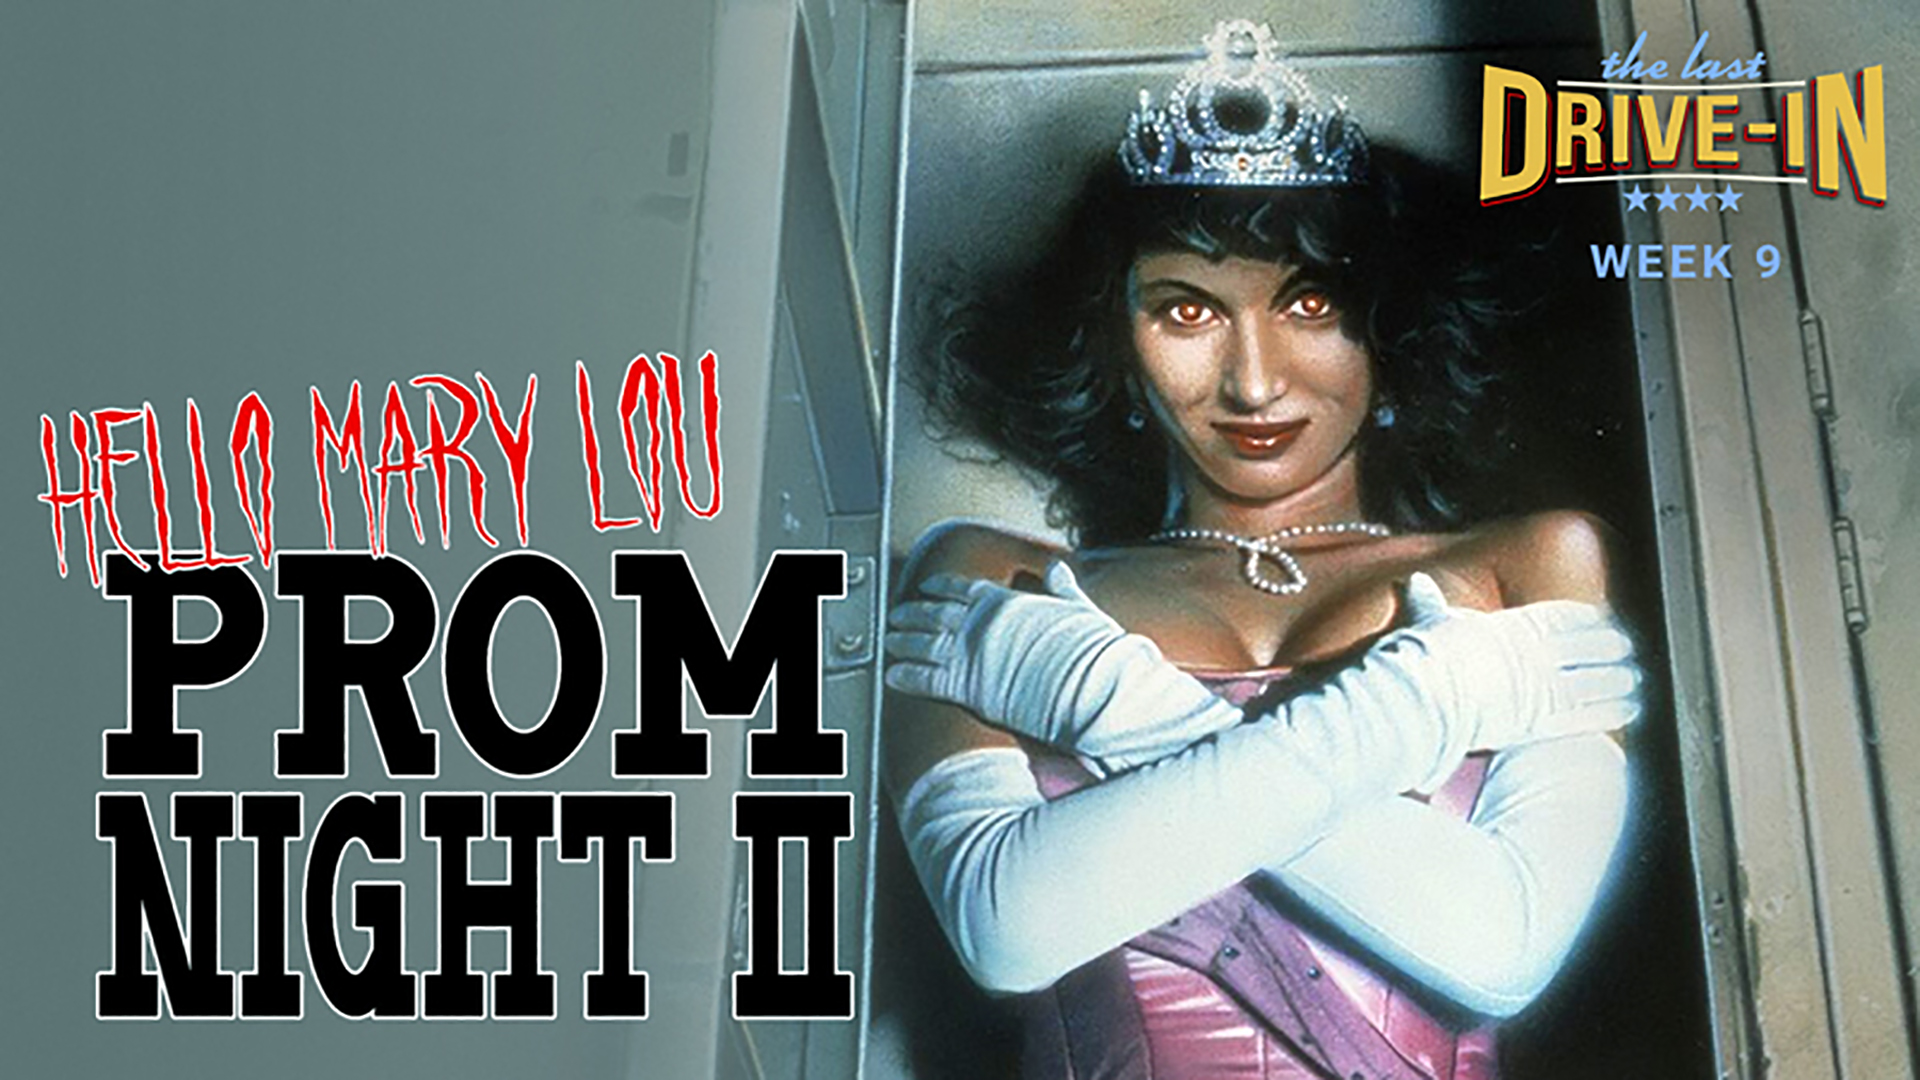 Week 9: Hello Mary Lou -  Prom Night 2, The spirit of a sexually voracious teen possesses another., TV-MA, Season 1028421, Episode 18